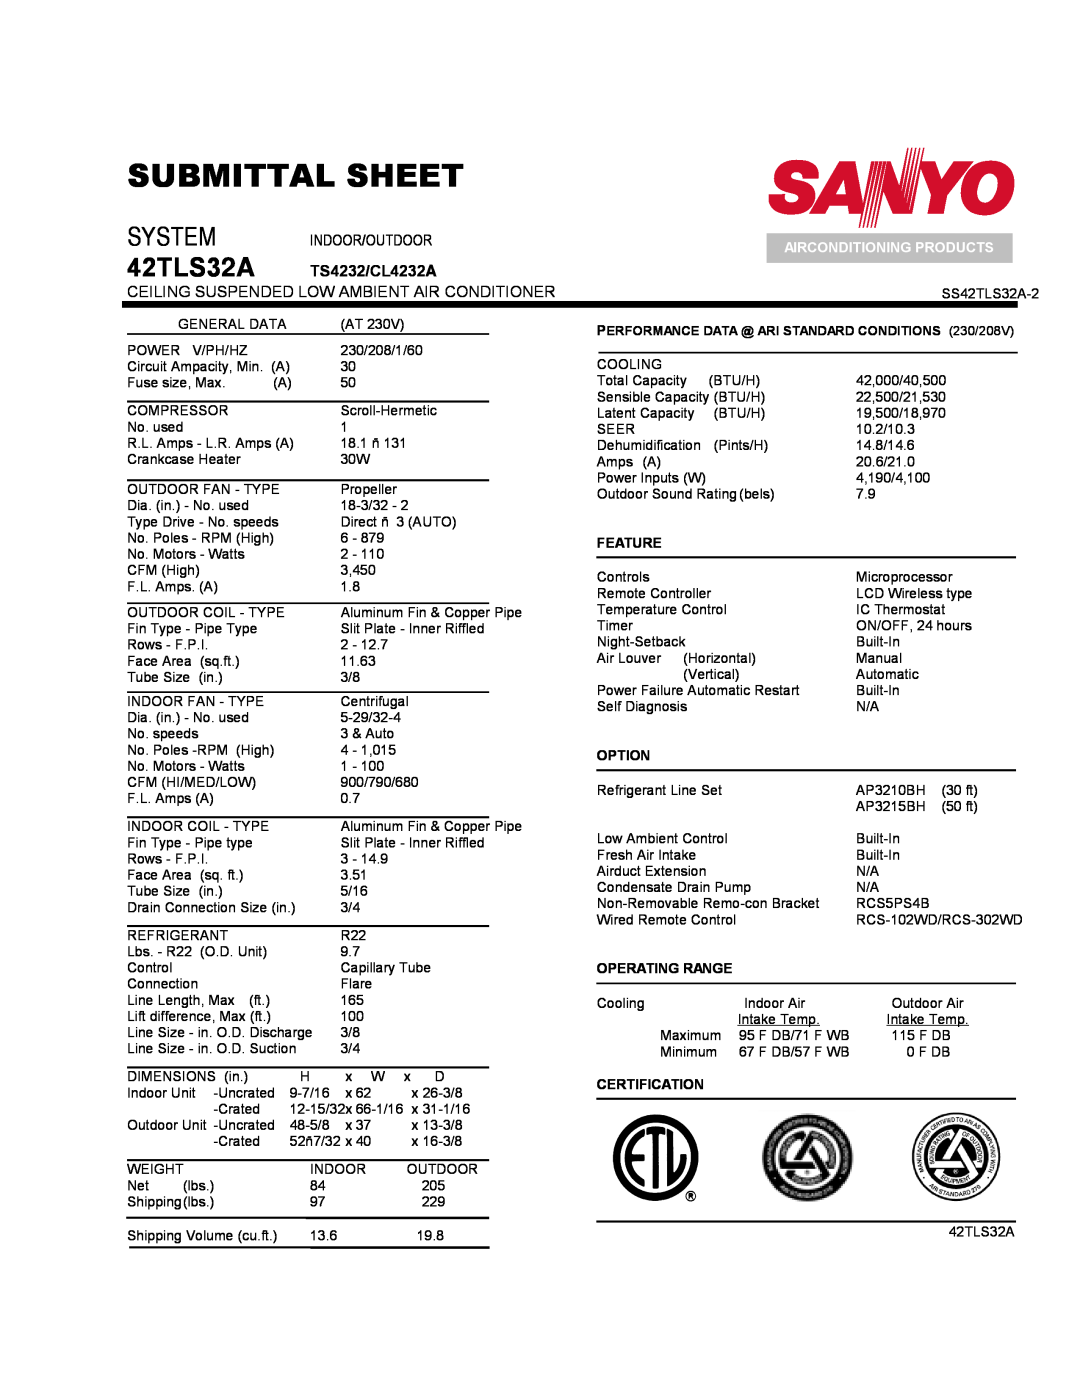 Sanyo C4232A Ceiling Suspended Low Ambient Air Conditioner, Submittal Sheet, System, 42TLS32A, Indoor/Outdoor, Feature 